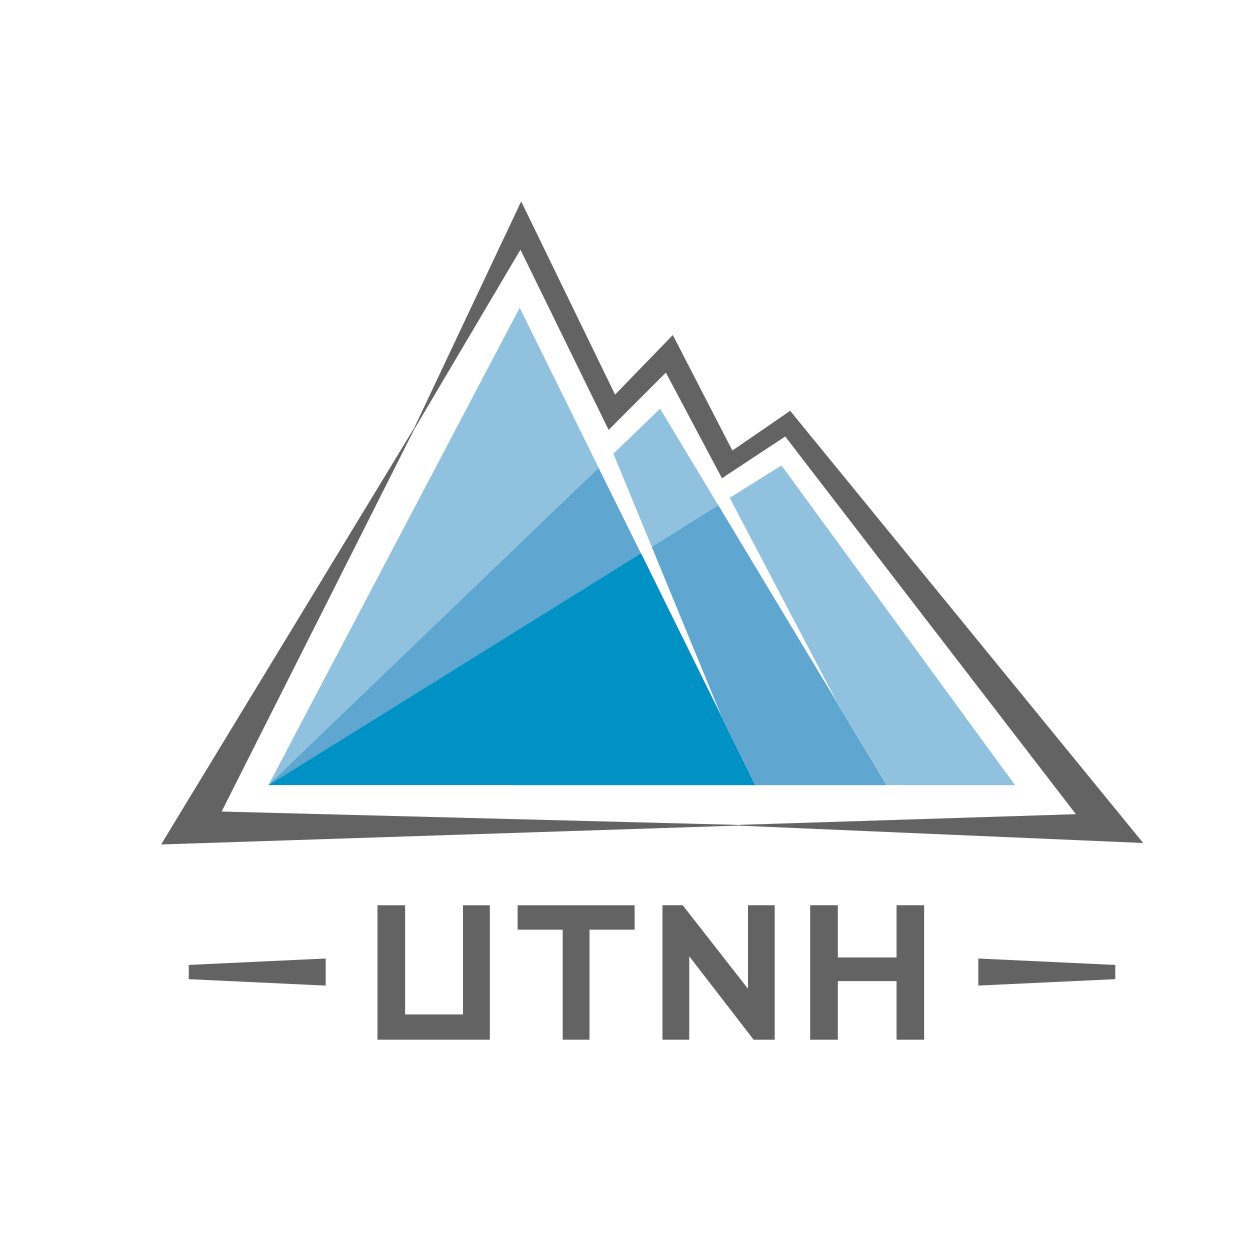 Started in 2013 by Skyview Sports, UTNH is a 100km trail ultra in eastern China that runs through thick bamboo forest and challenging alpine peaks.